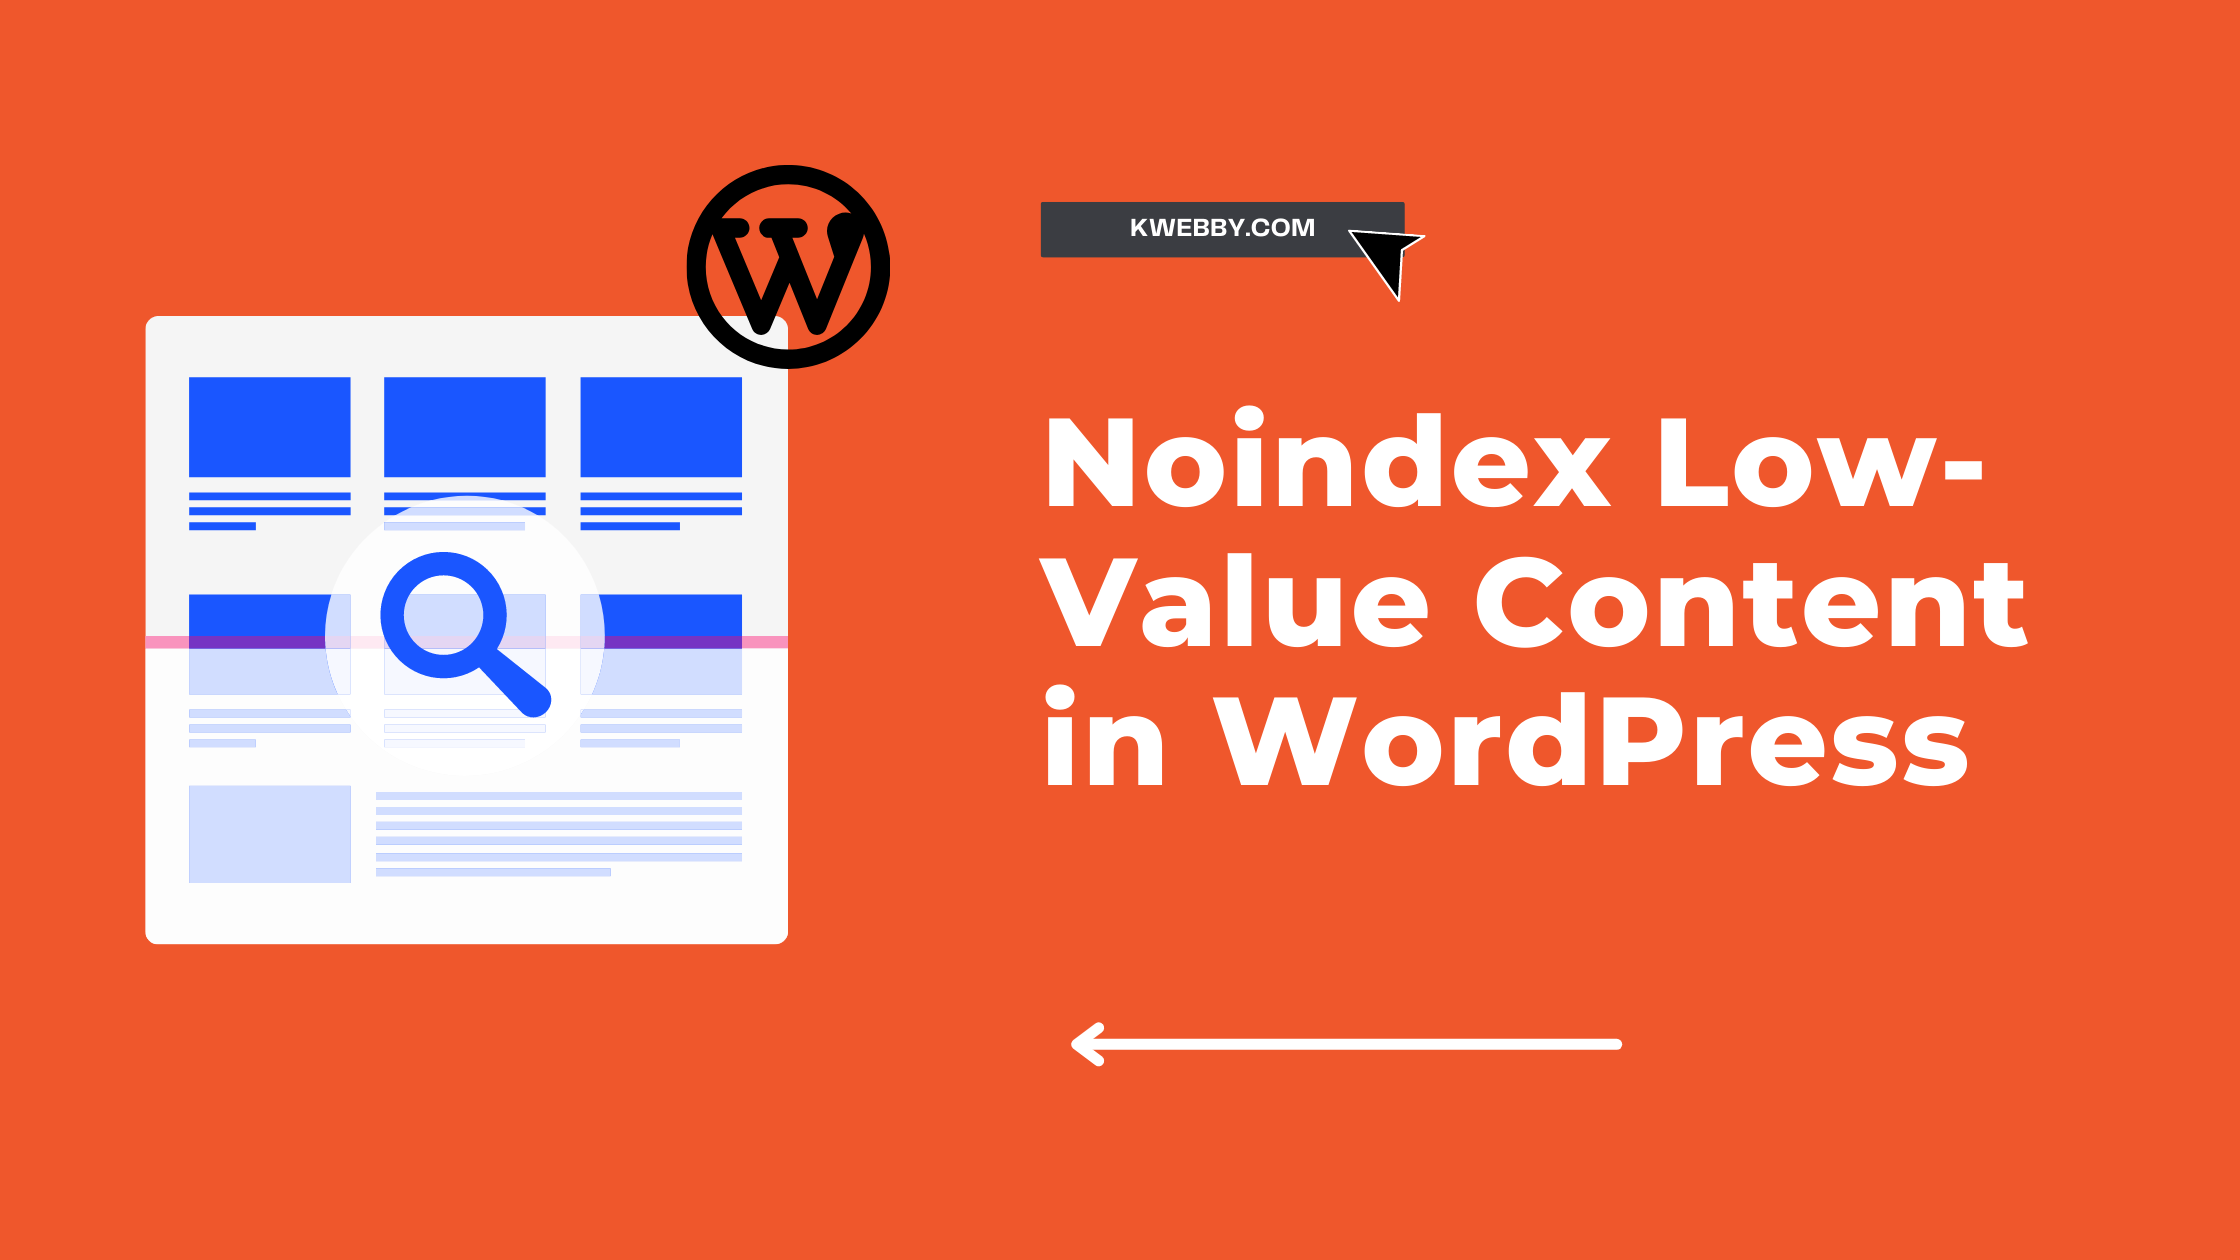 How to Noindex Low-Value Content in WordPress in 2 Simple Steps